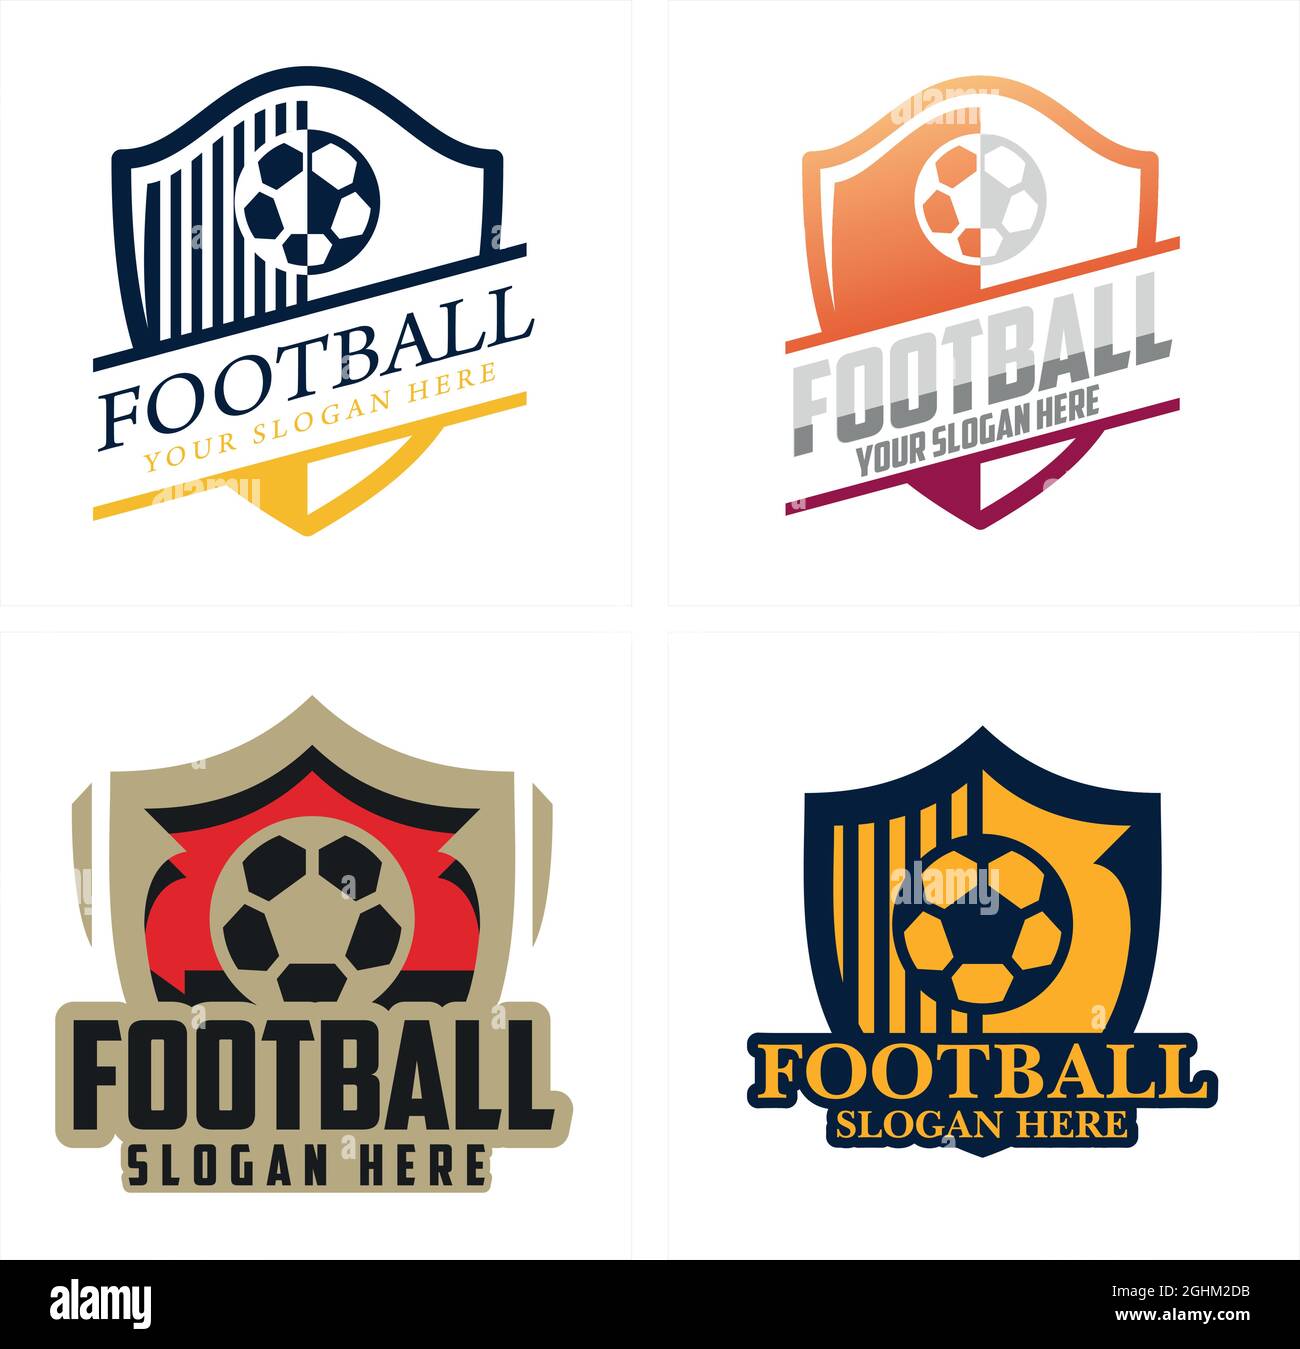 Football Clubs Logo Printed On Paper Stock Photos - 180 Images